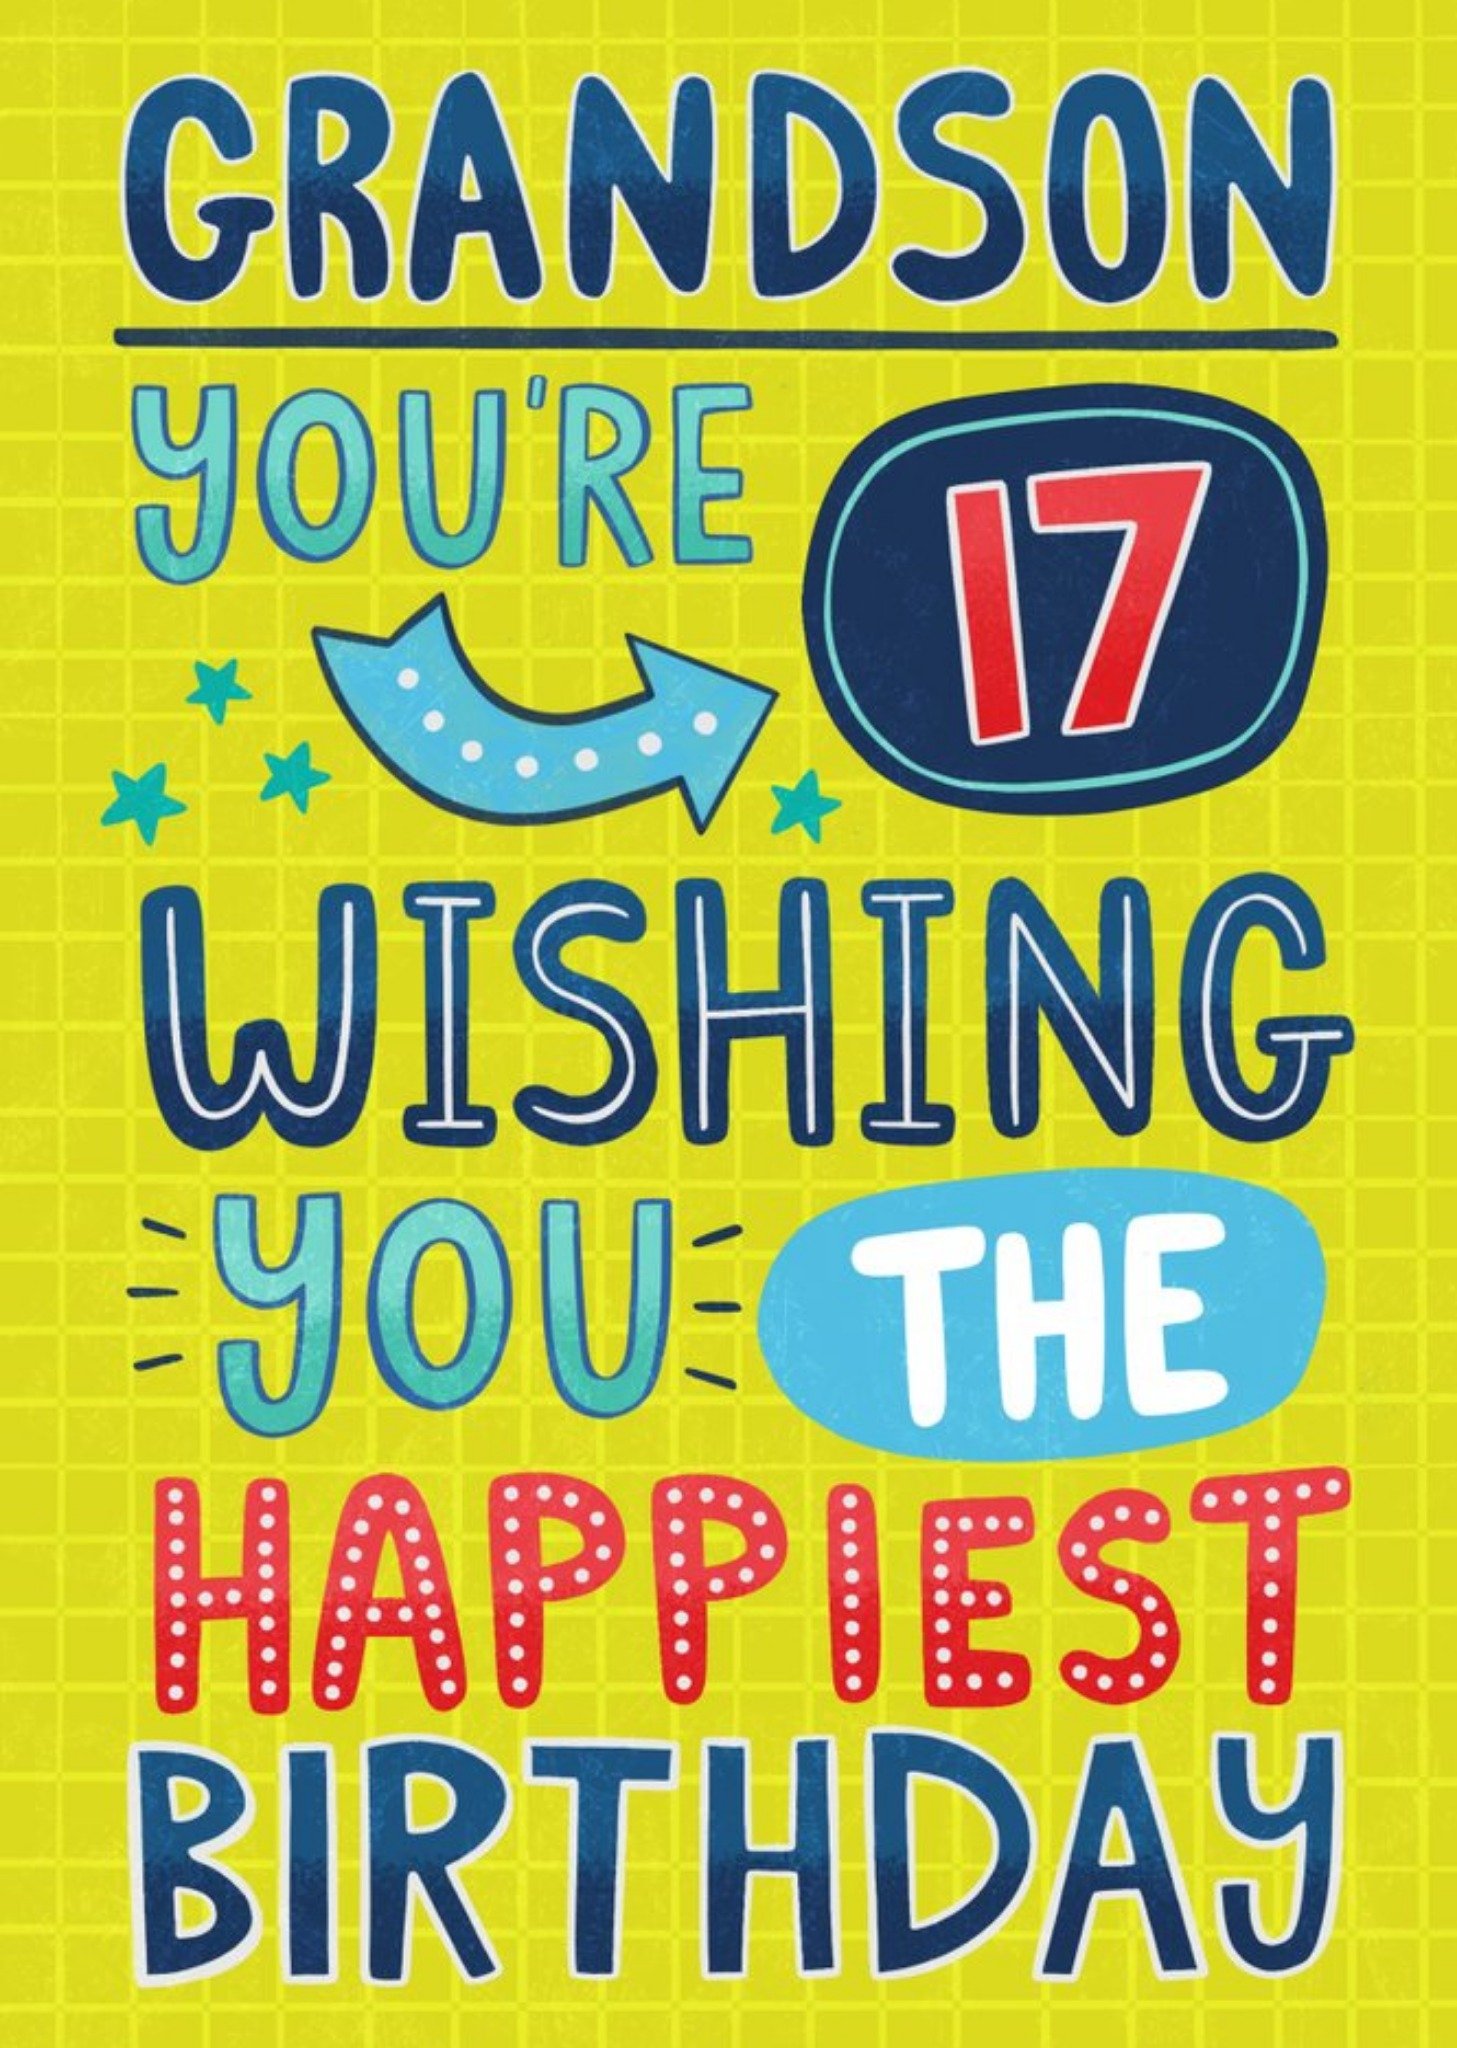 Moonpig Typographic Grandson You're 17 Wishing You The Happiest Birthday Card, Large